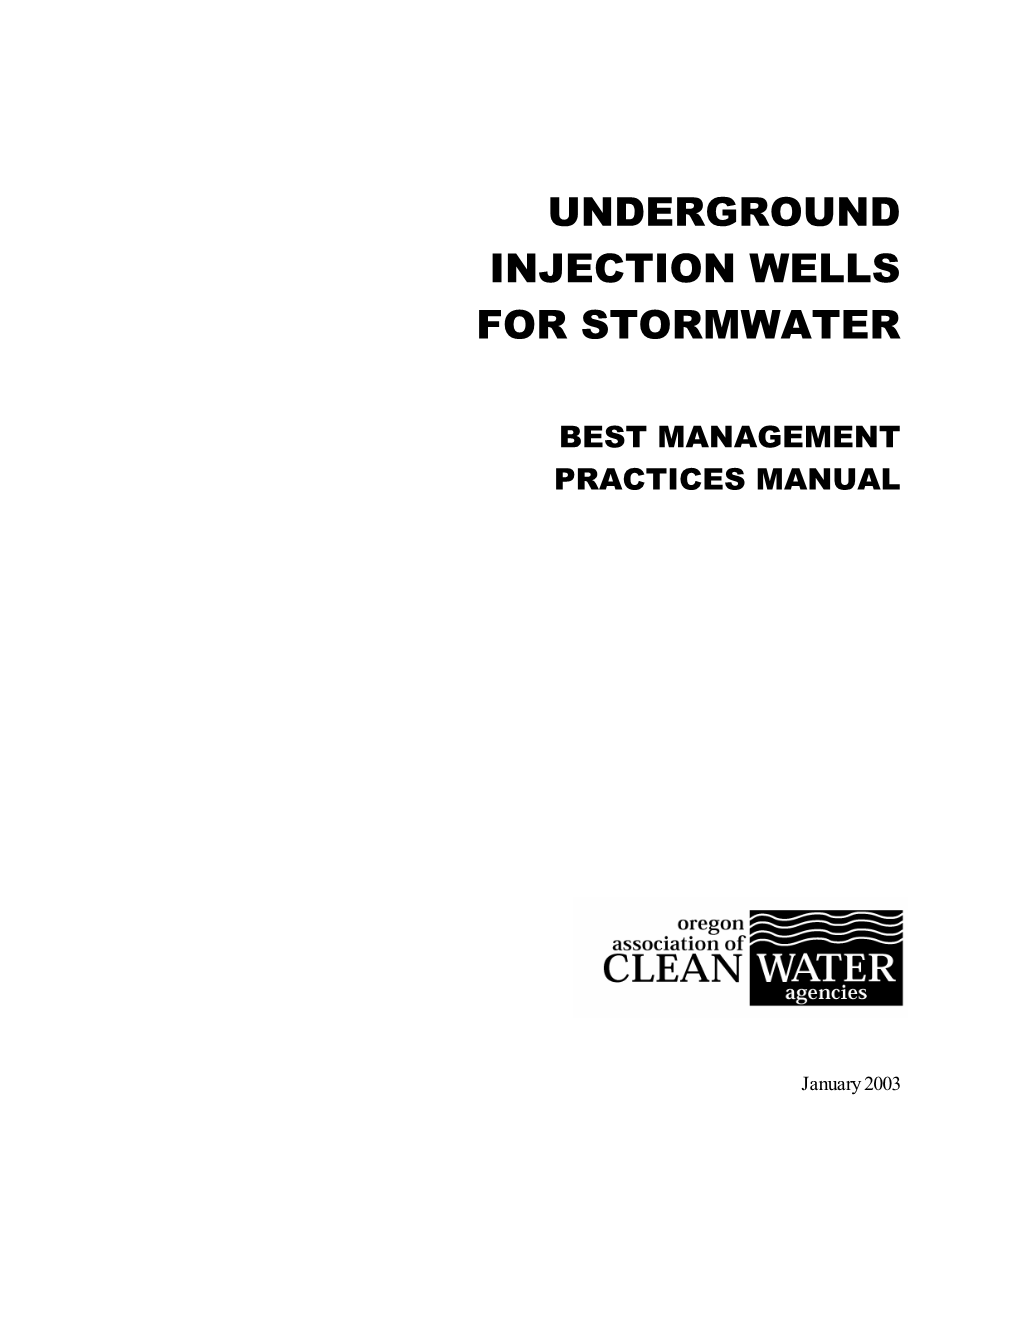 Underground Injection Wells for Stormwater